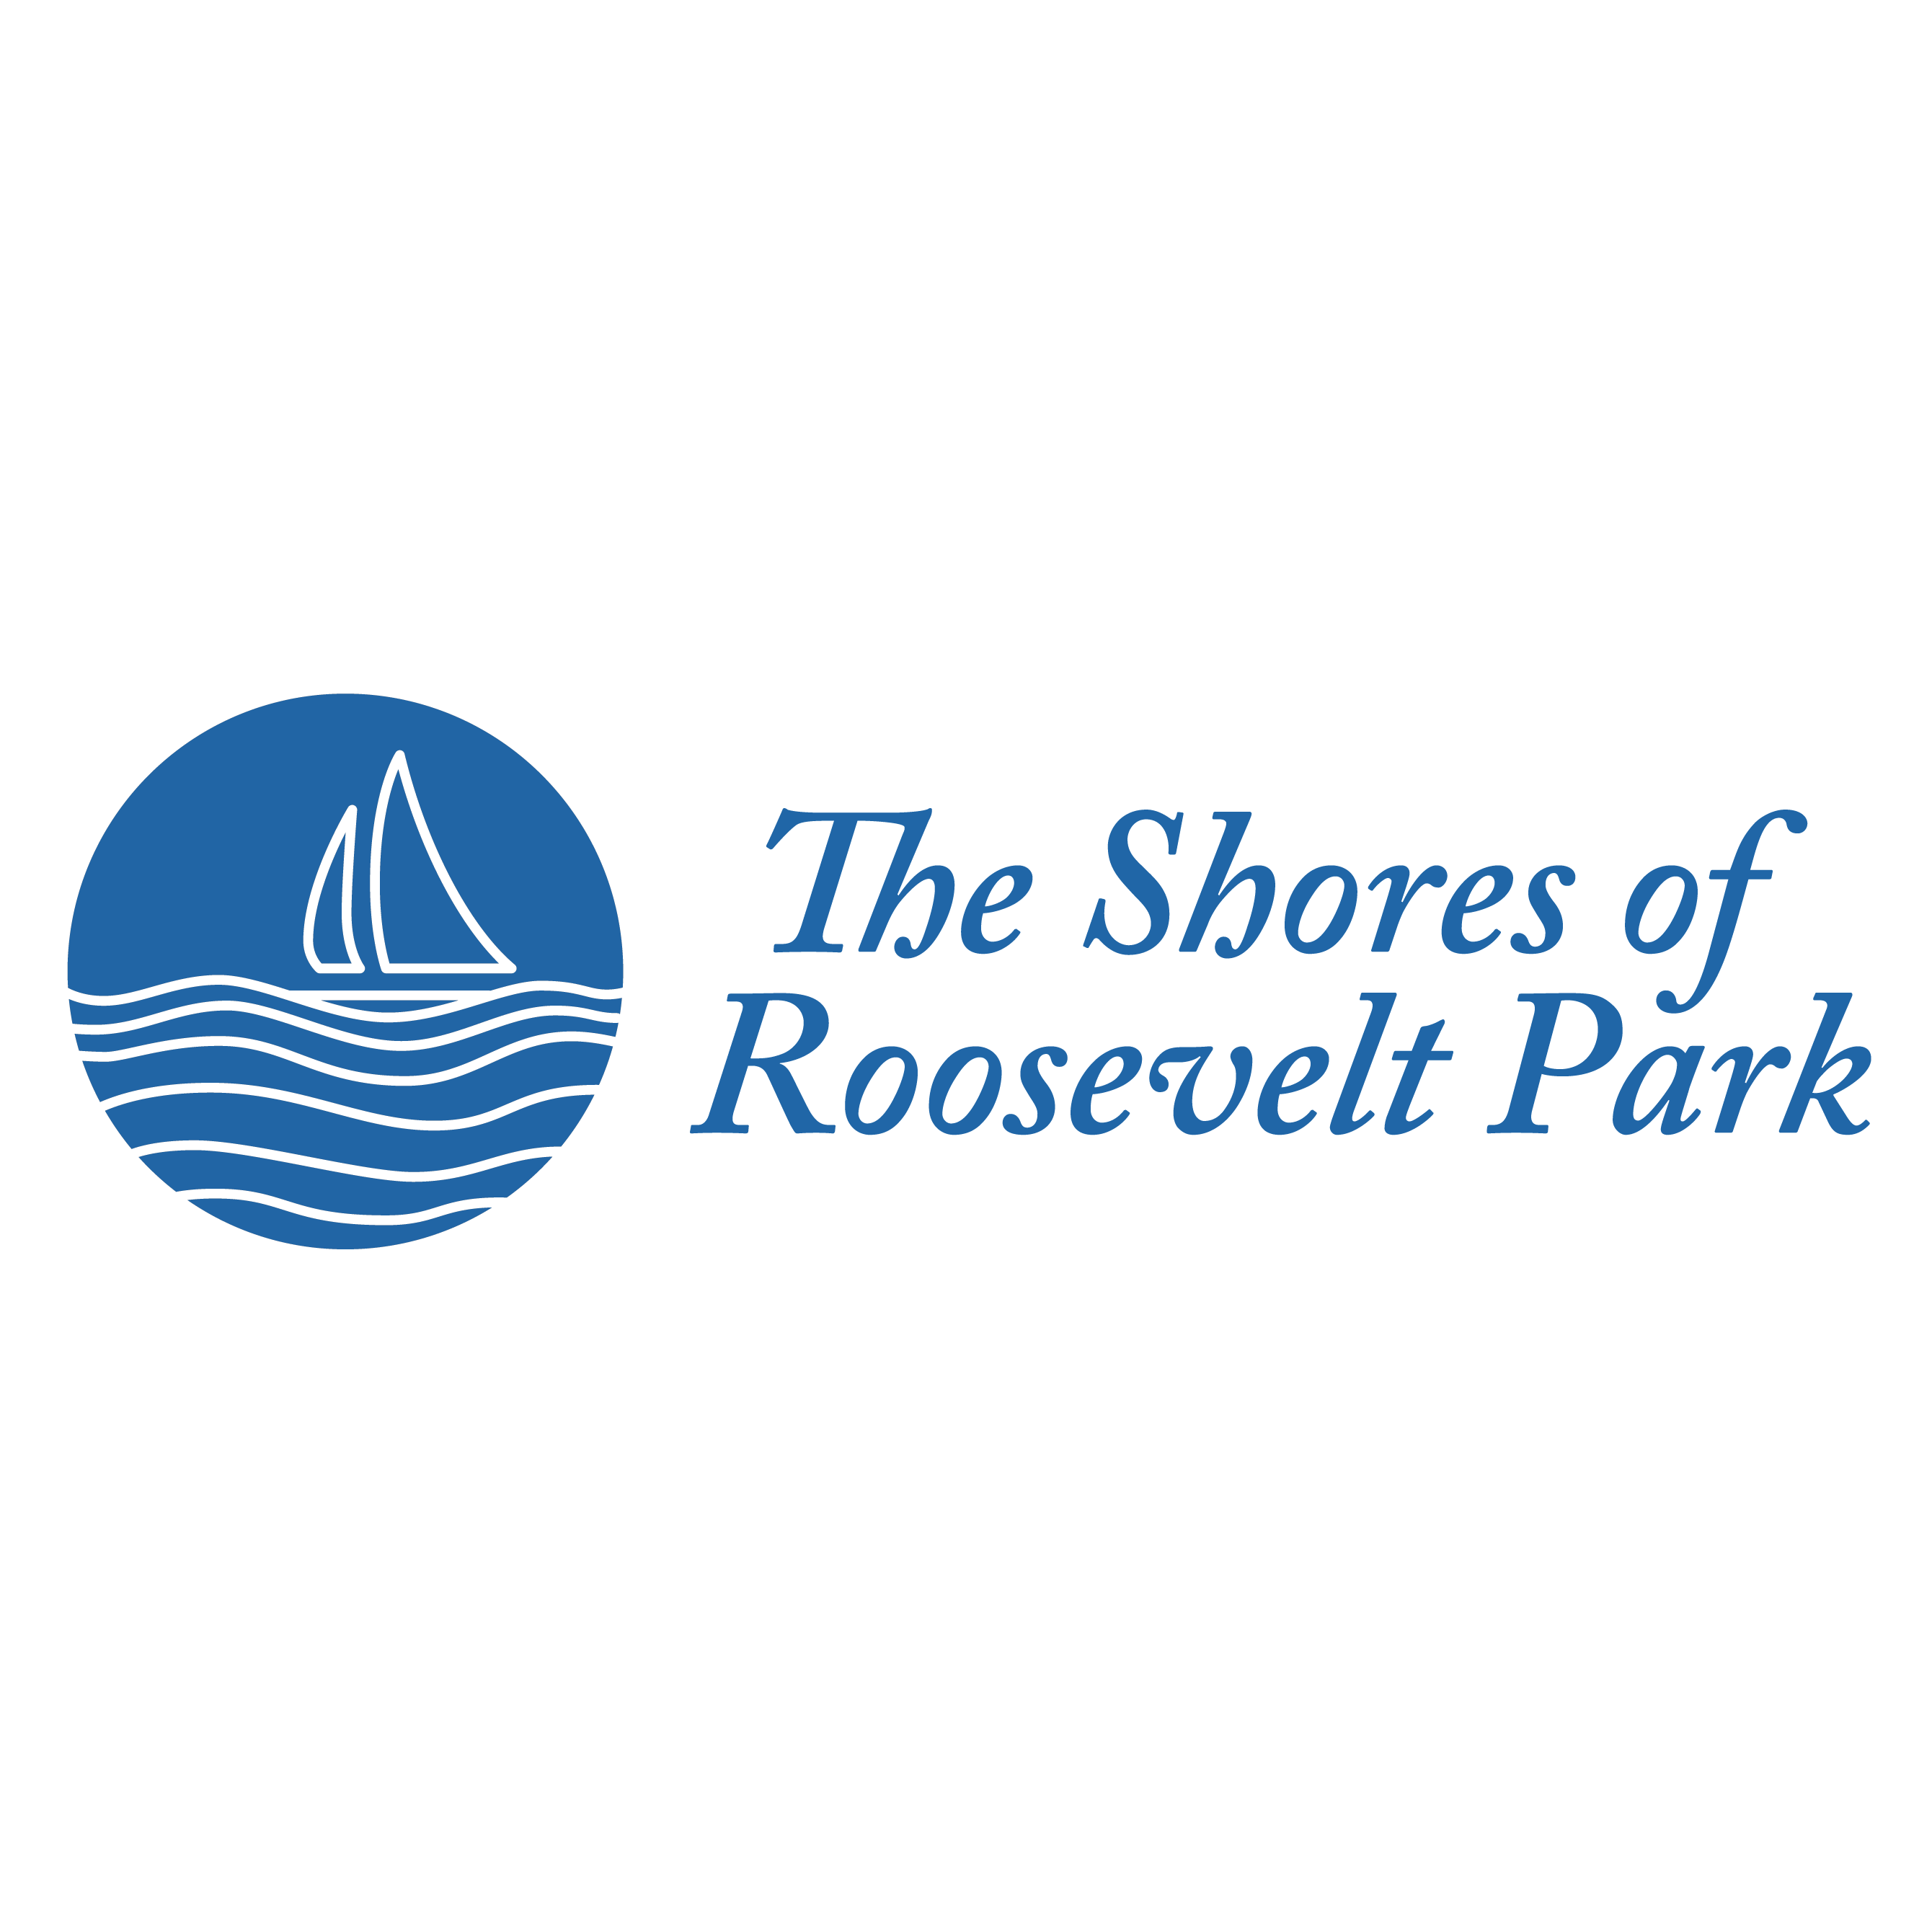 The Shores of Roosevelt Park